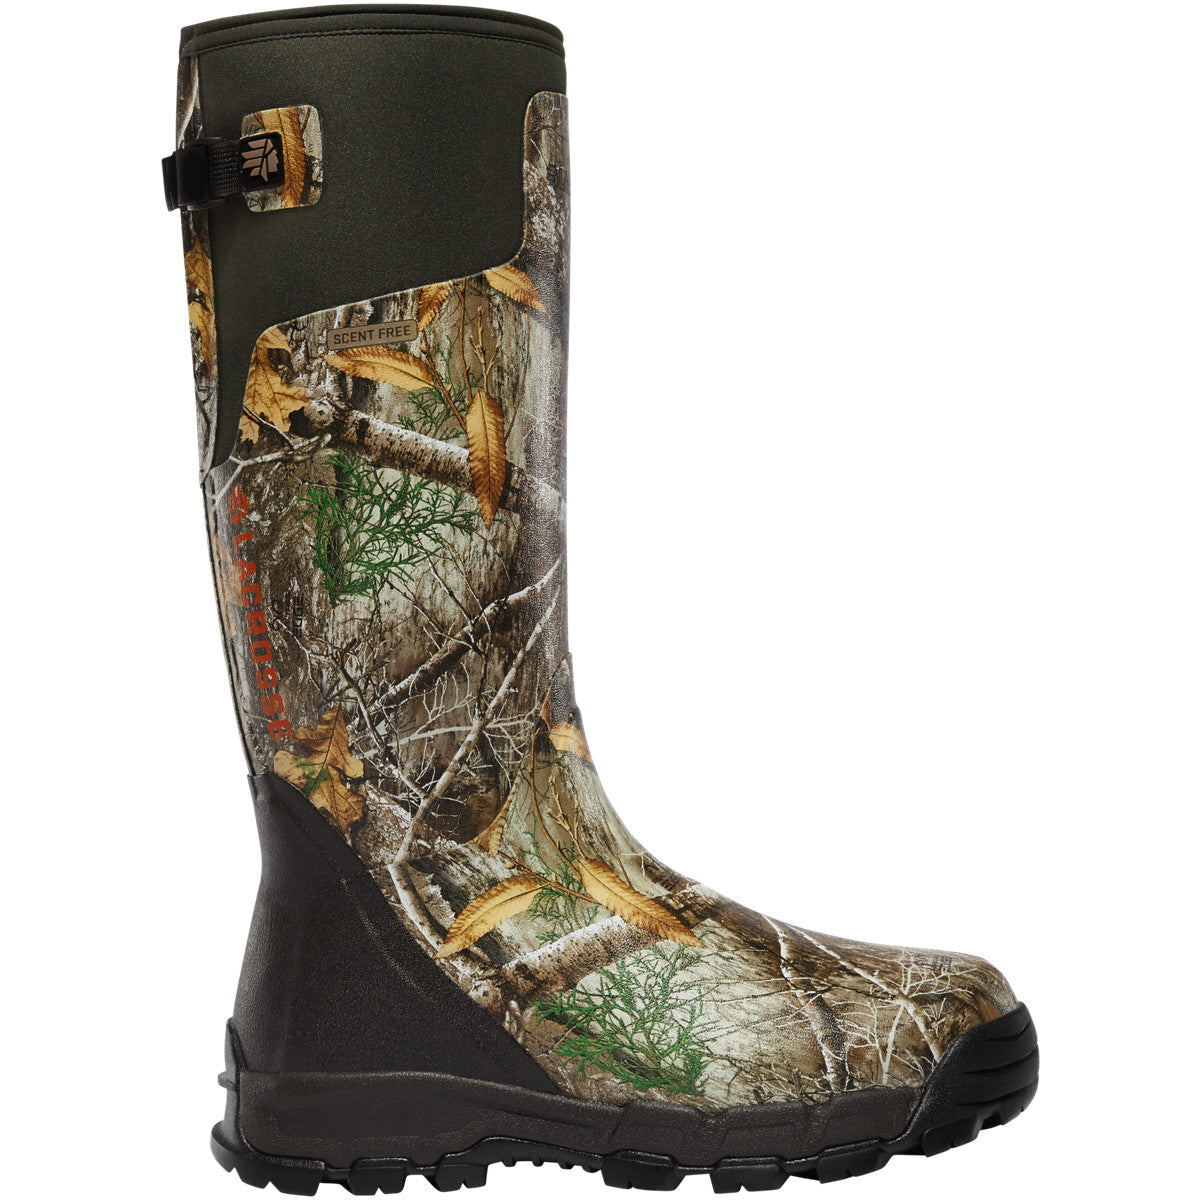 Lacrosse Men's Alphaburly Pro 18" WP 400g Thinsulate Rubber Hunt Boot - 376012 6 / Realtree Edge - Overlook Boots